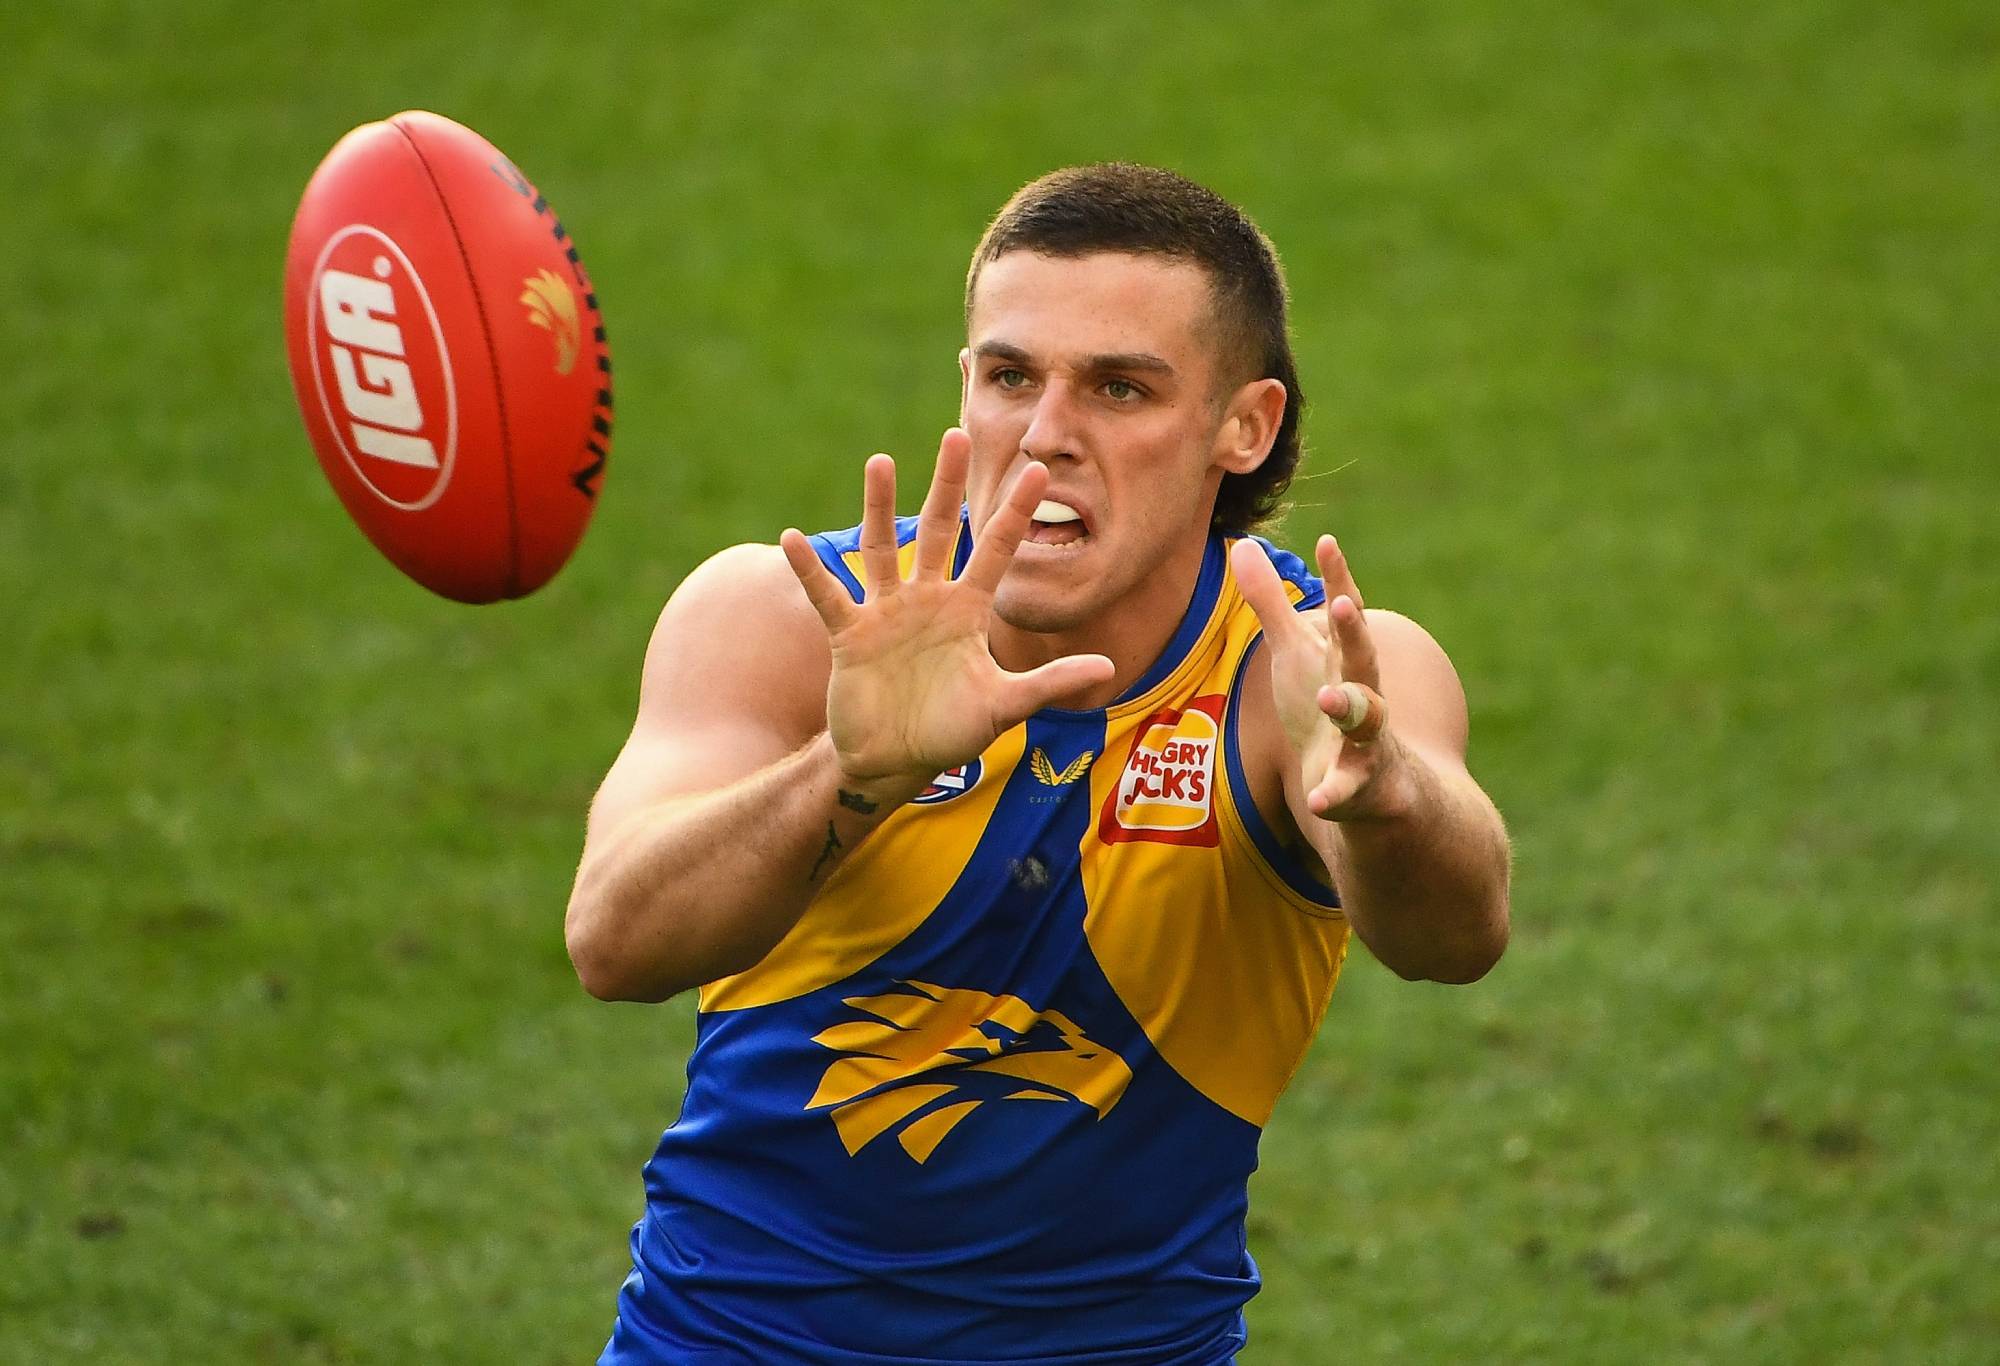 PERTH, AUSTRALIA - JUNE 27: Jake Waterman of the Eagles marks the ball during the 2021 AFL Round 15 match between the West Coast Eagles and the Western Bulldogs at Optus Stadium on June 27, 2021 in Perth, Australia. (Photo by Daniel Carson/AFL Photos via Getty Images)